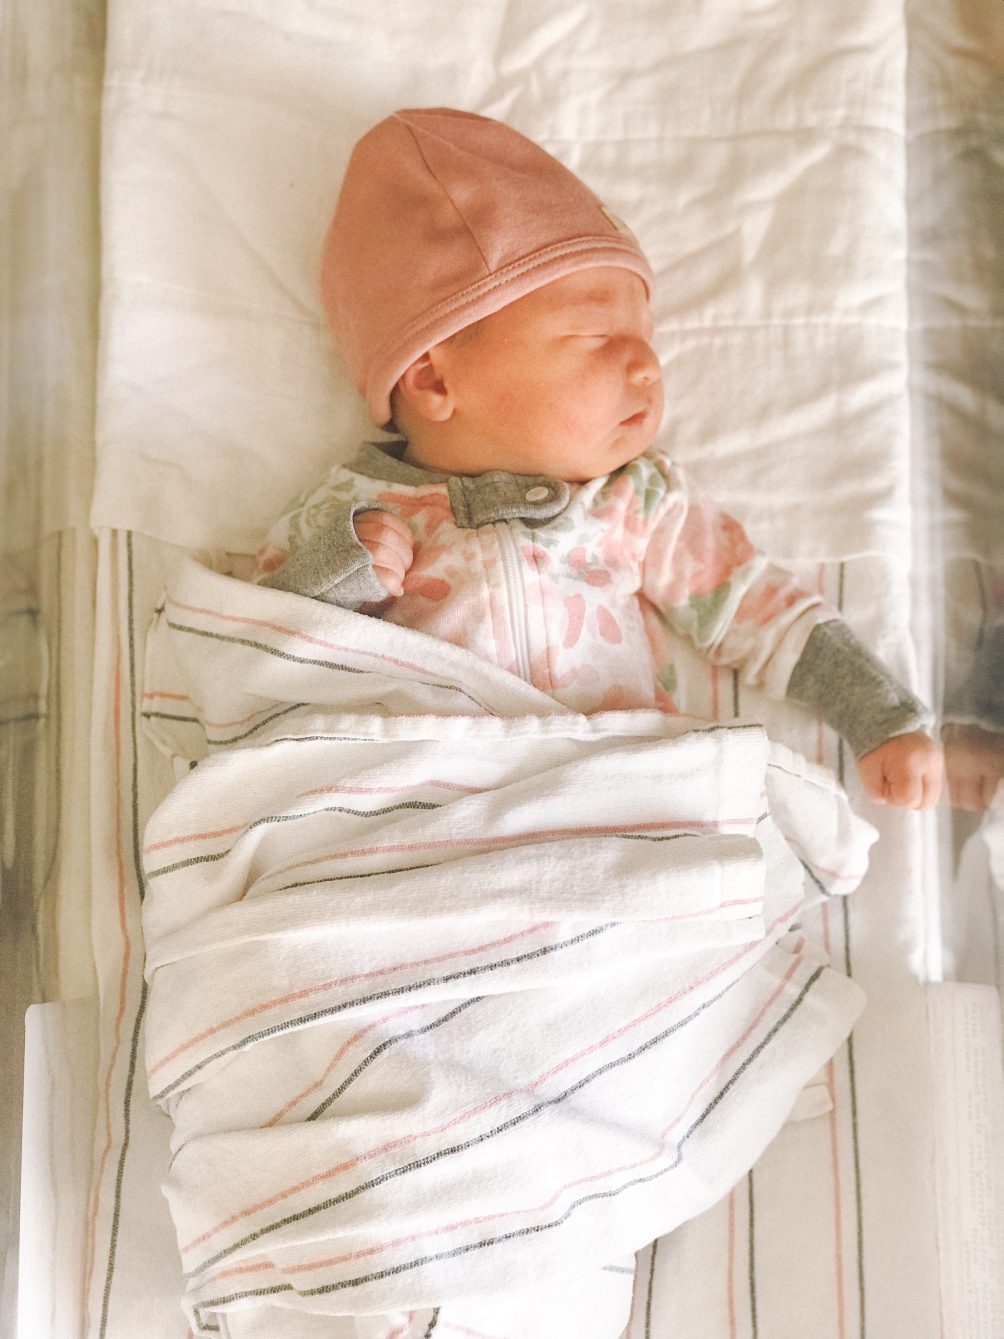 the birth story of our baby girl, Amelie Ingrid